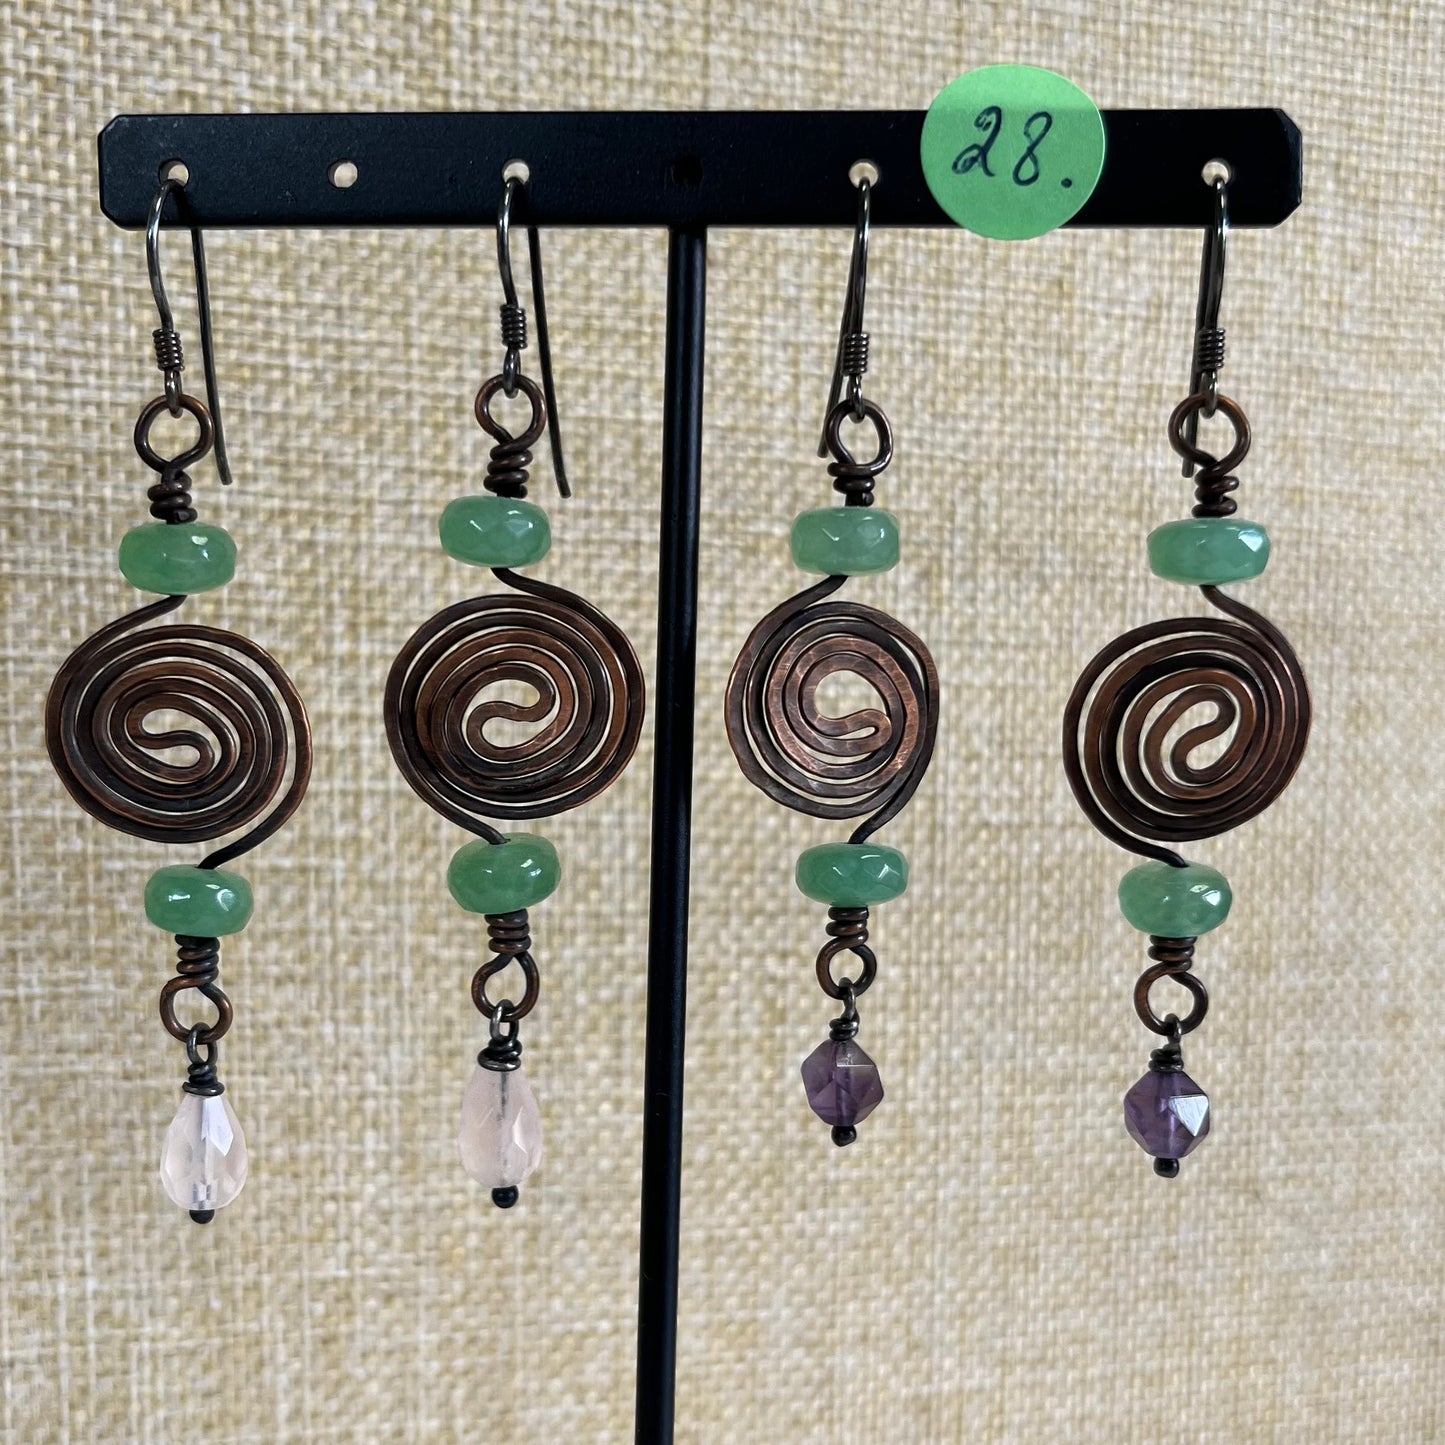 Brass earrings with natural stones